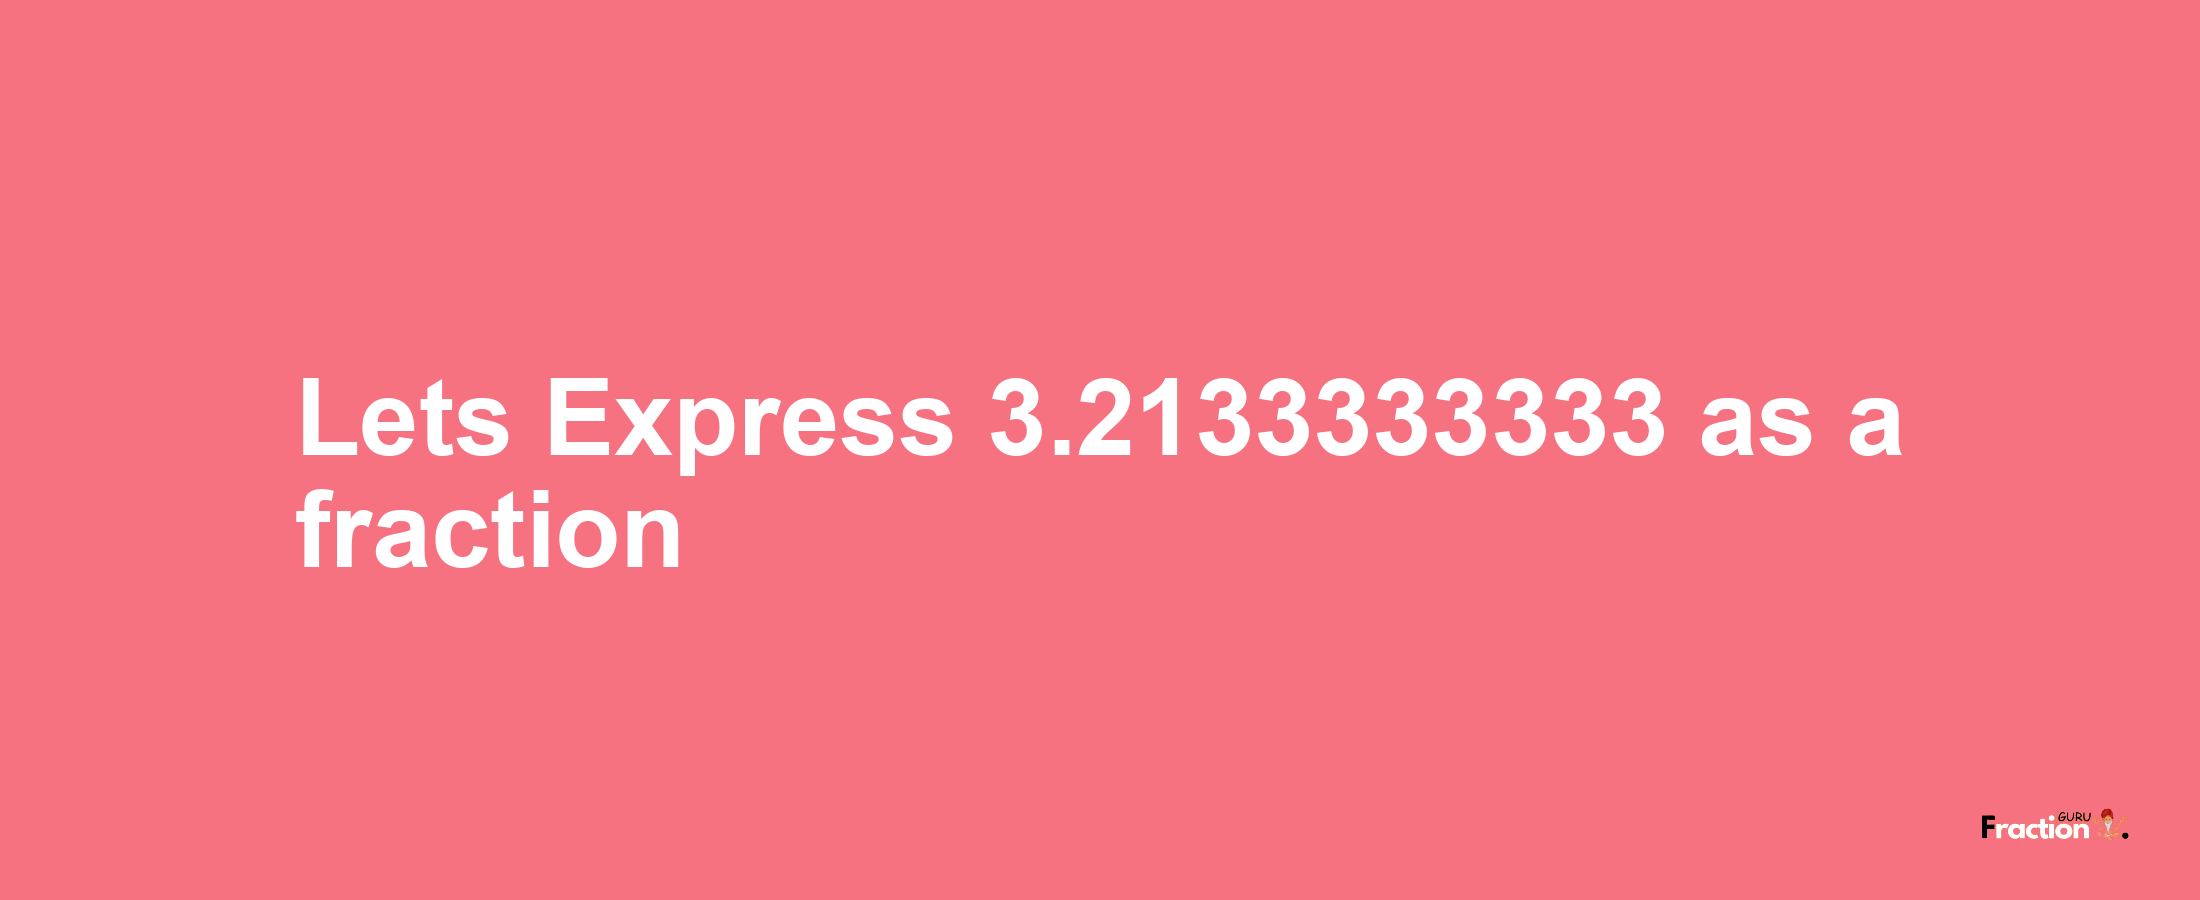 Lets Express 3.2133333333 as afraction